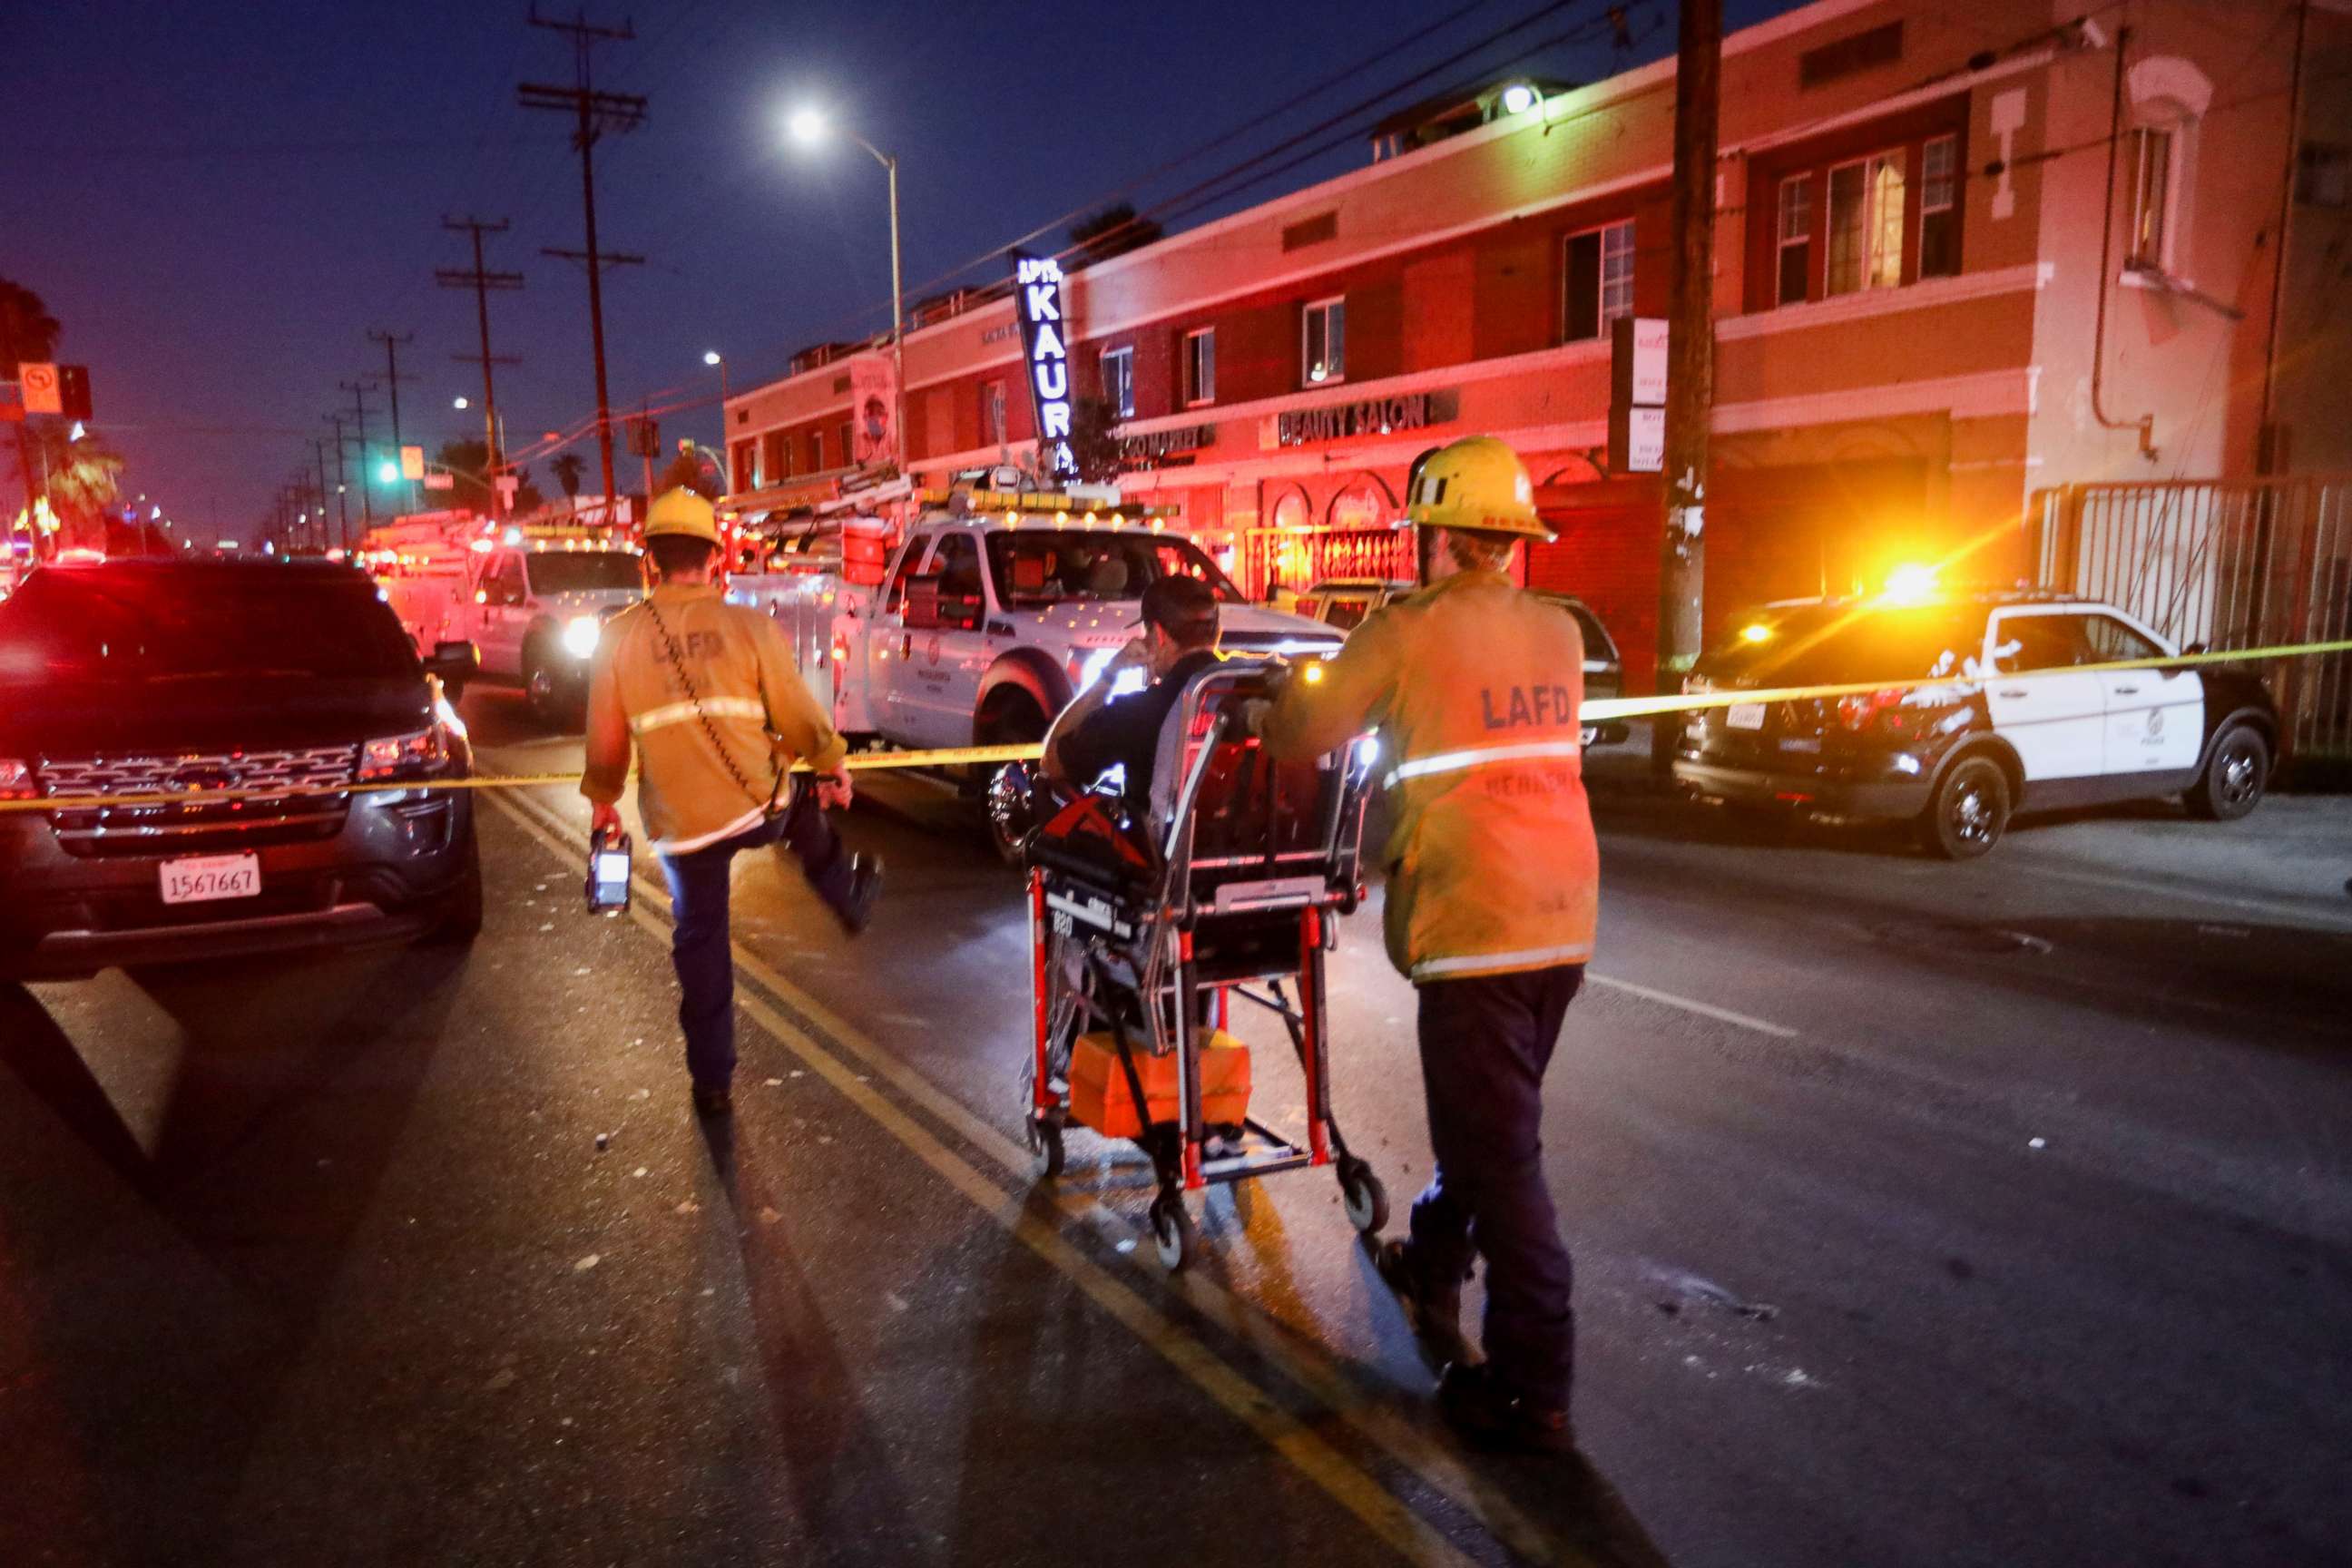 PHOTO: Members of the Los Angeles Fire Department transport a person at the site of an explosion after police attempted to safely detonate illegal fireworks that were seized, in Los Angeles, California, U.S., June 30, 2021. REUTERS/David Swanson